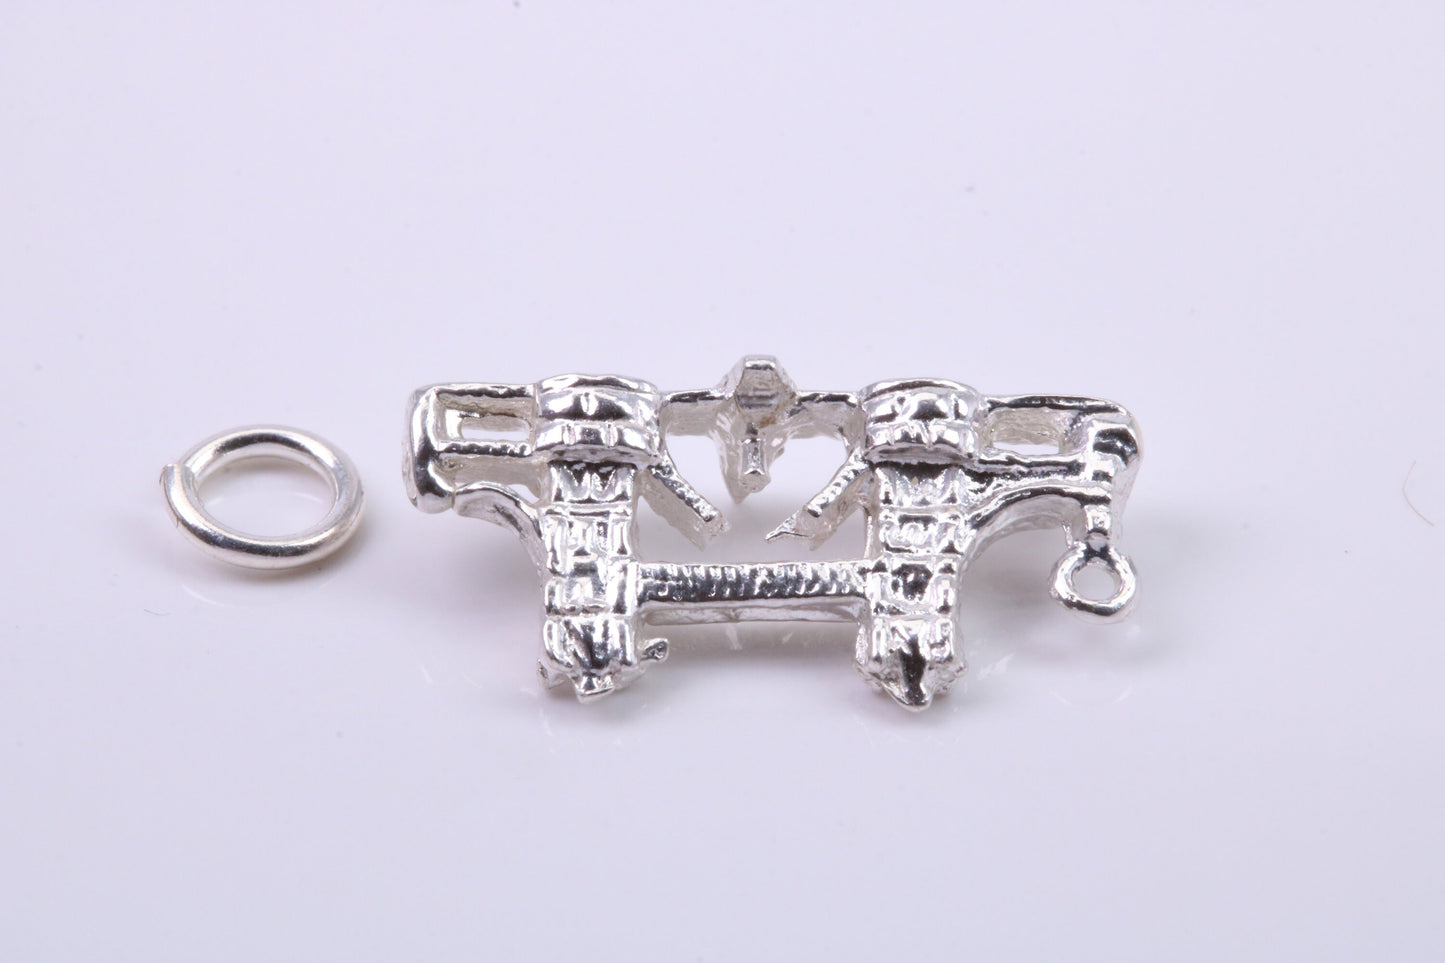 Iconic London Bridge Charm, Traditional Charm, Made from Solid 925 Grade Sterling Silver, Complete with Attachment Link